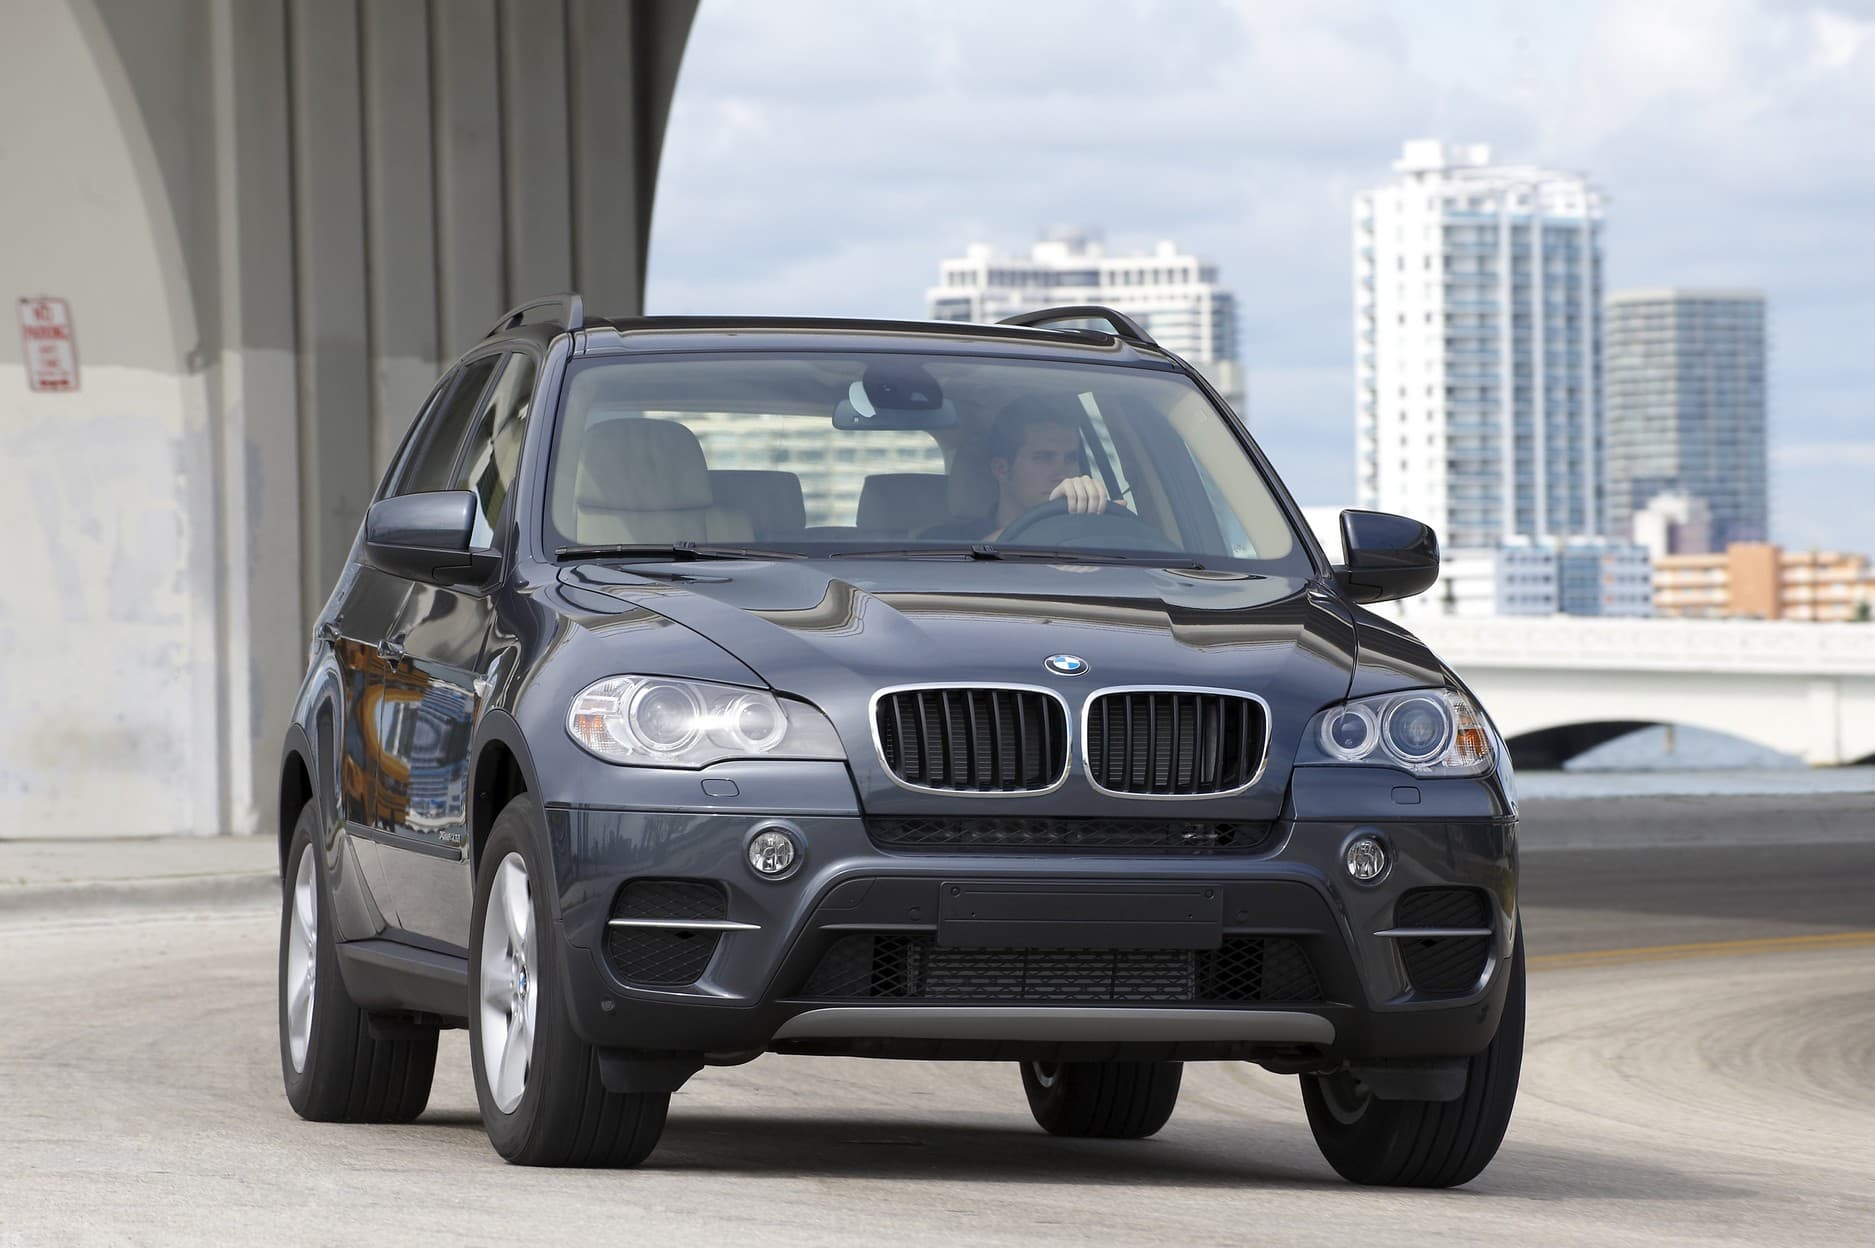 Quick Snap: E70 BMW X5 Lowered on H&R Springs @ ModAuto